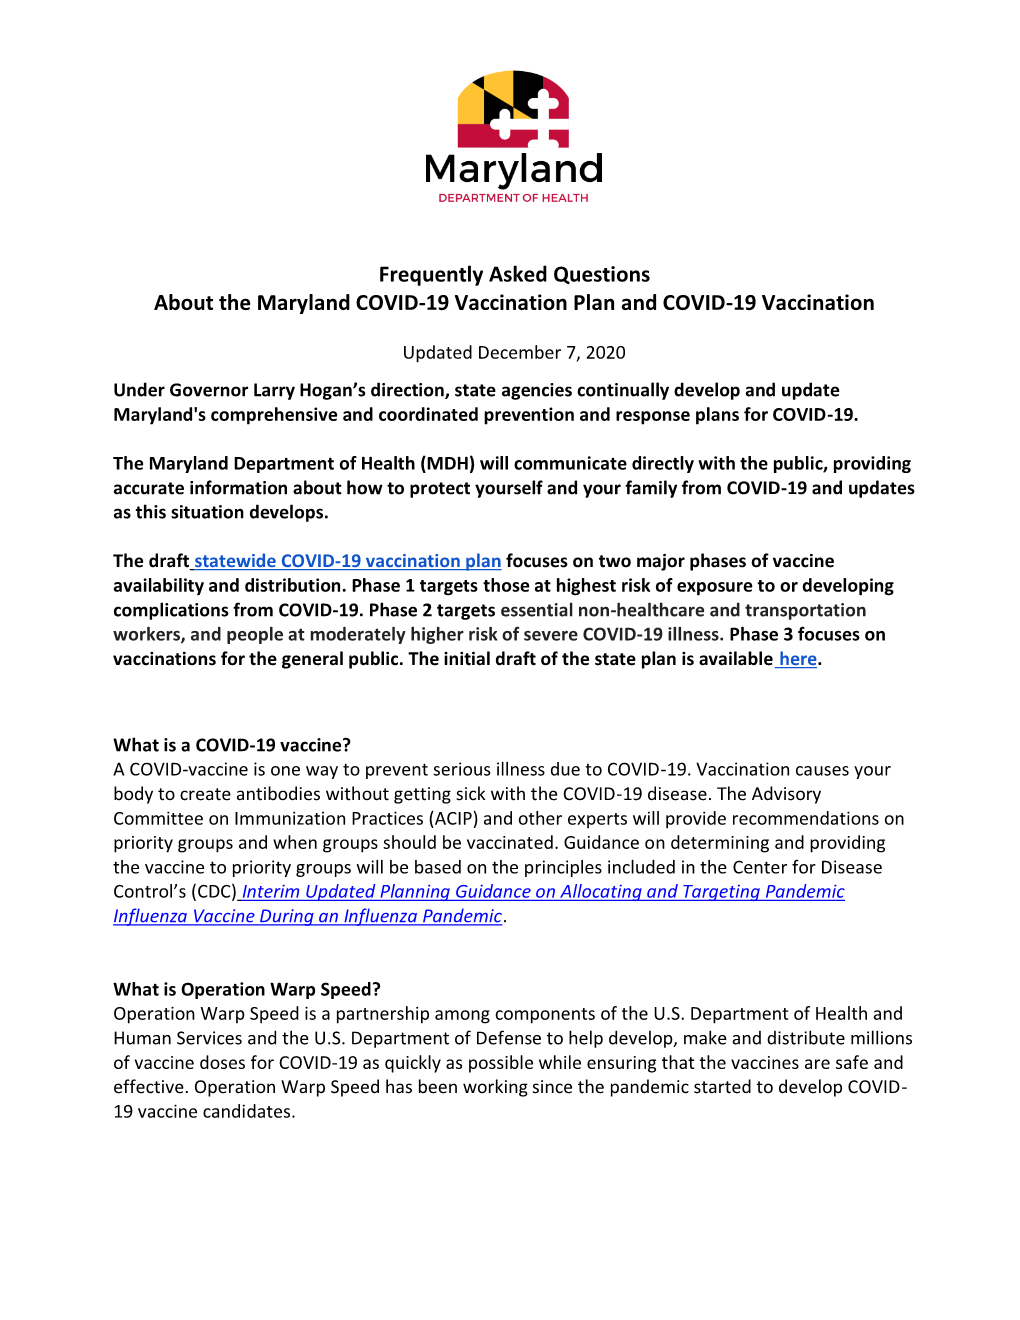 Frequently Asked Questions About the Maryland COVID-19 Vaccination Plan and COVID-19 Vaccination